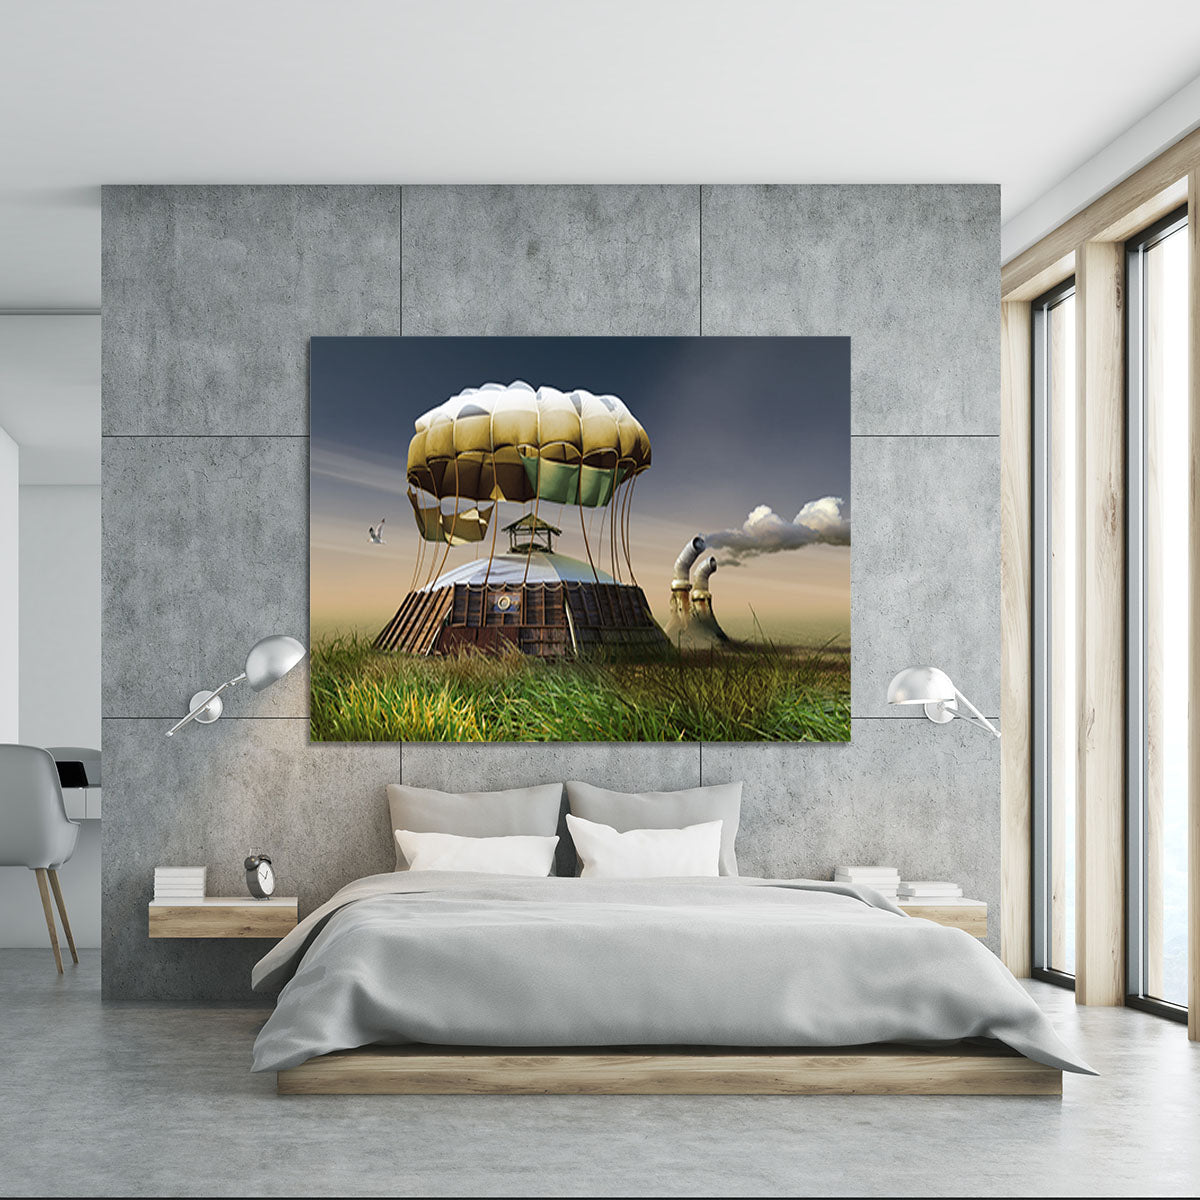 The home Canvas Print or Poster - 1x - 5